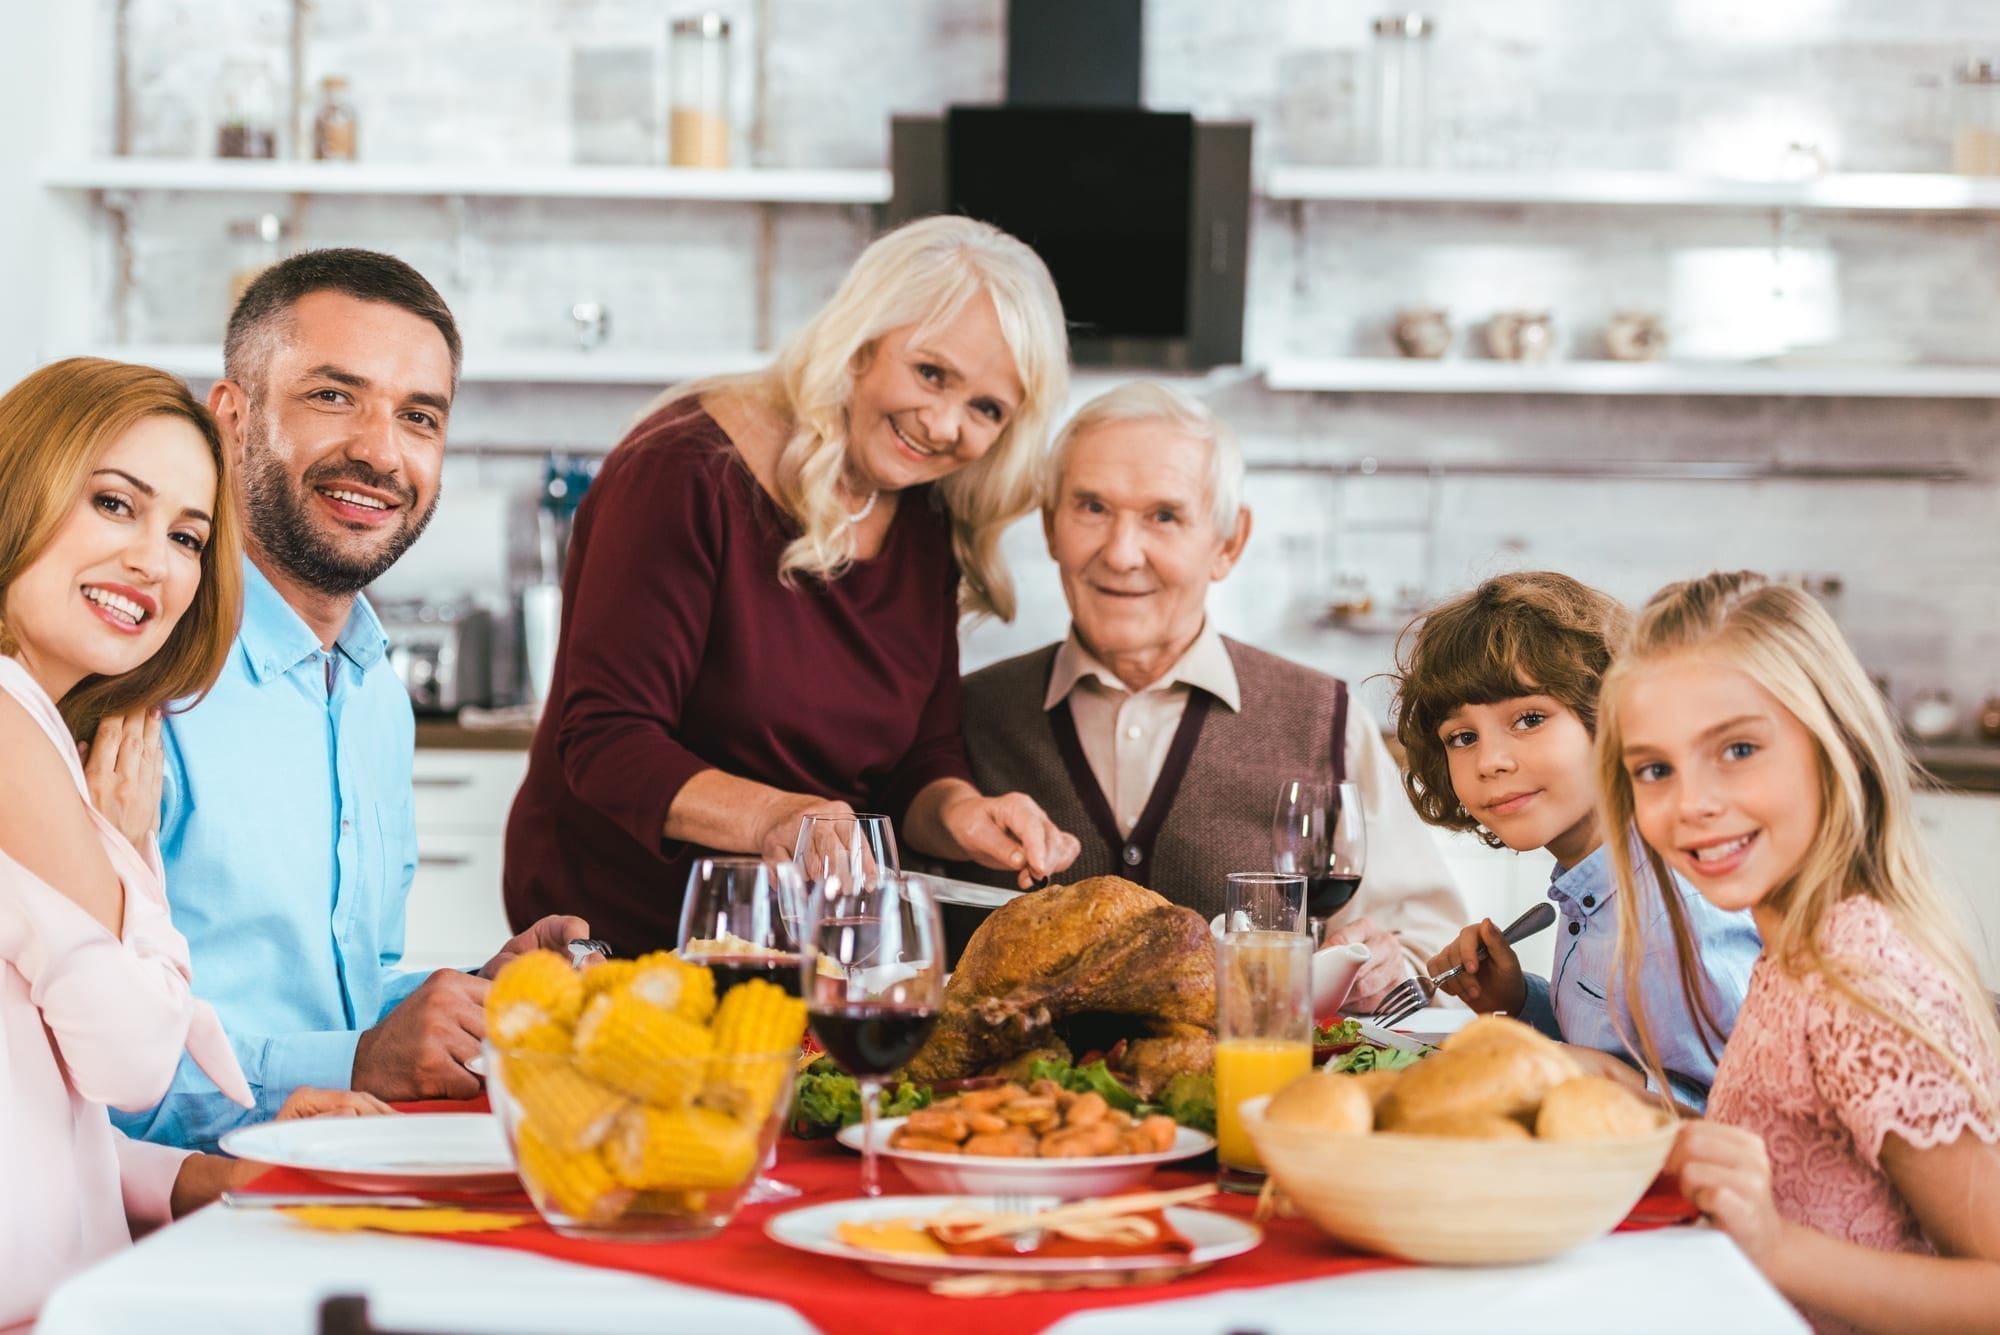 How Kids Can Maintain a Healthy Smile During Thanksgiving